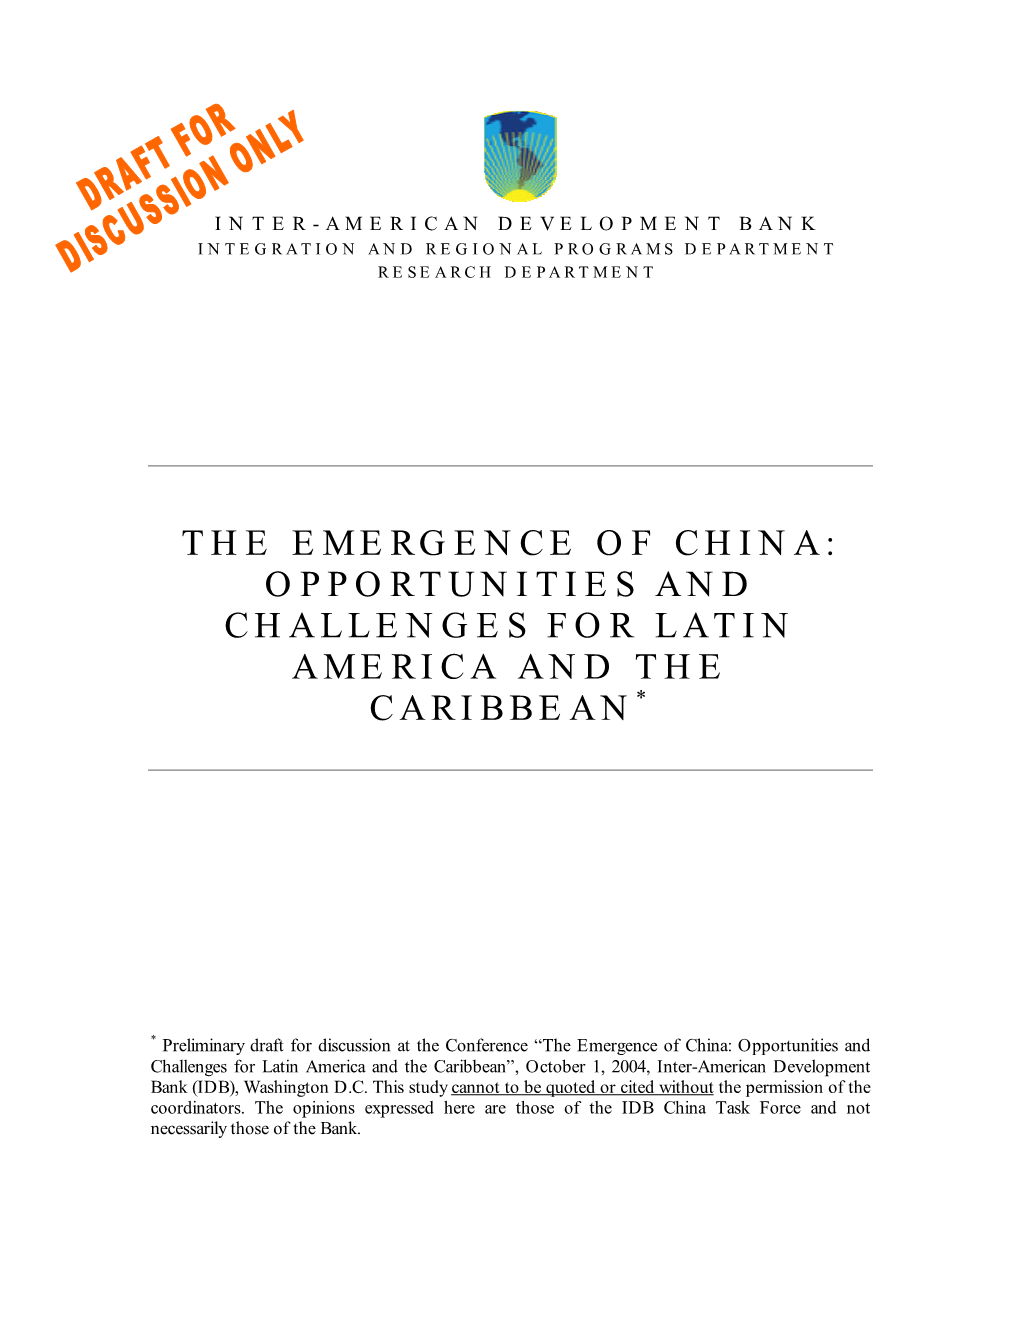 The Emergence of China: Opportunities and Challenges for Latin America and the Caribbean*